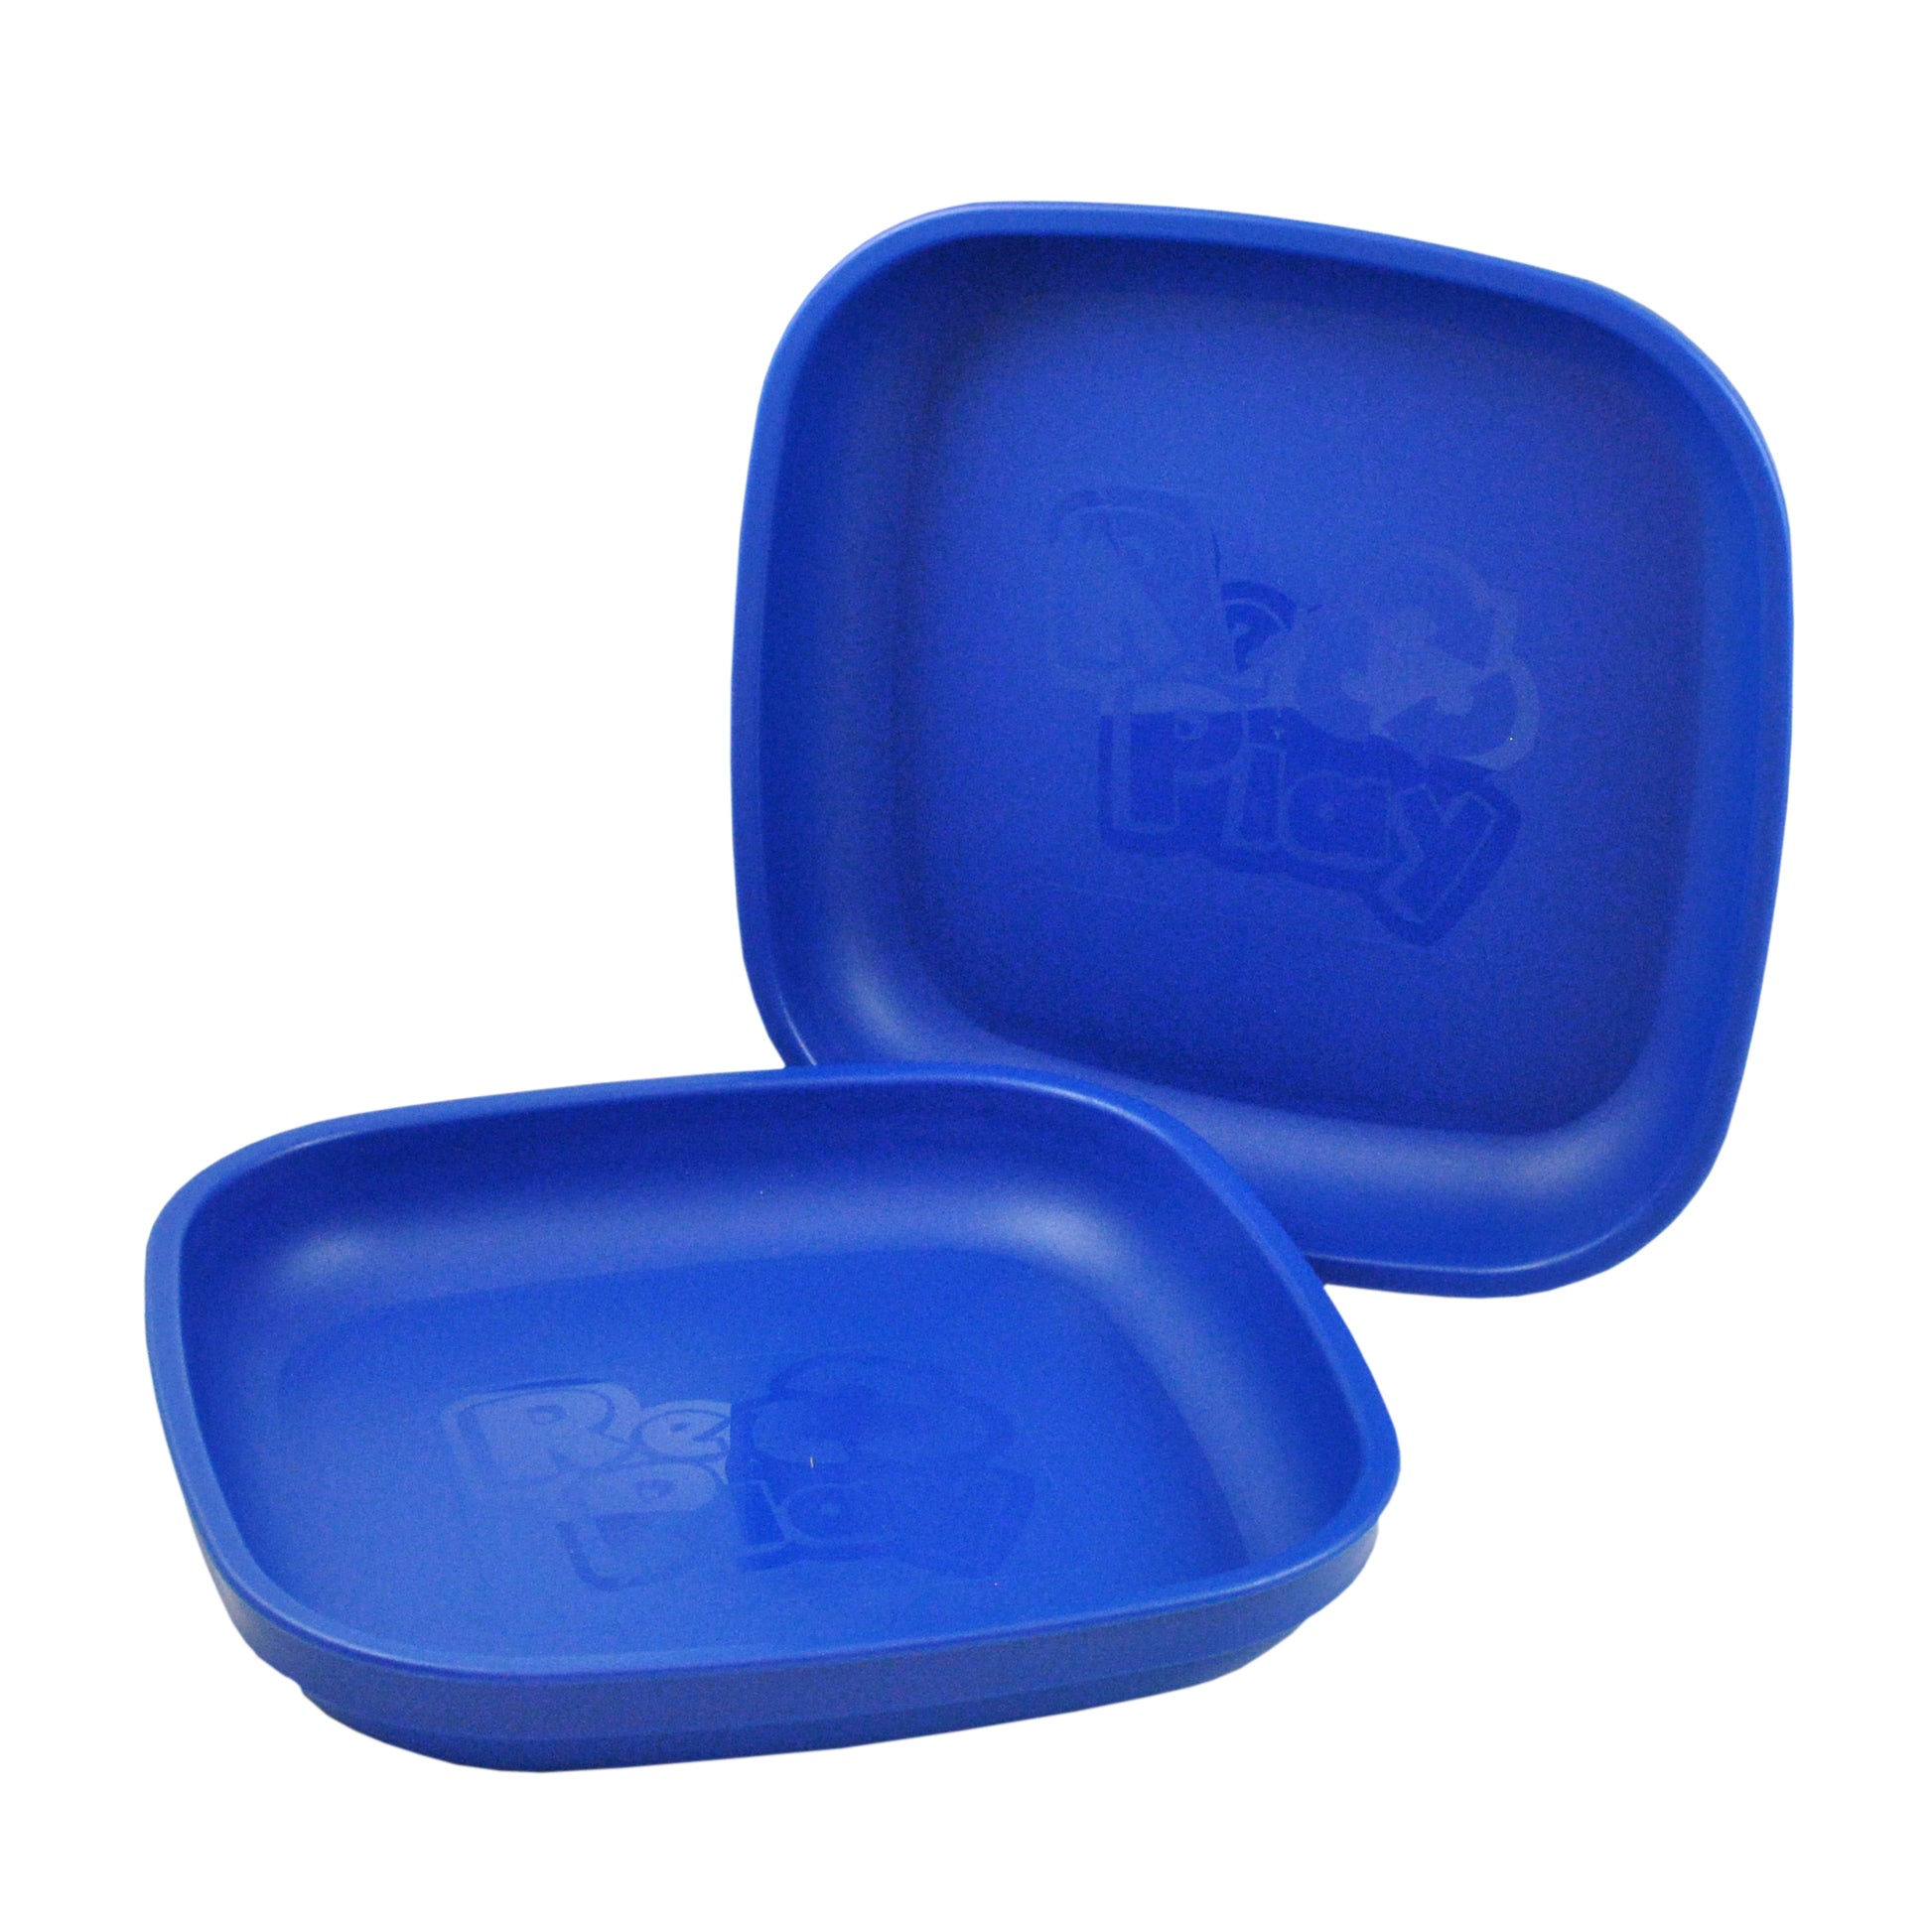 Re-Play Flat Plate Standard Size in Navy Blue from Bear & Moo